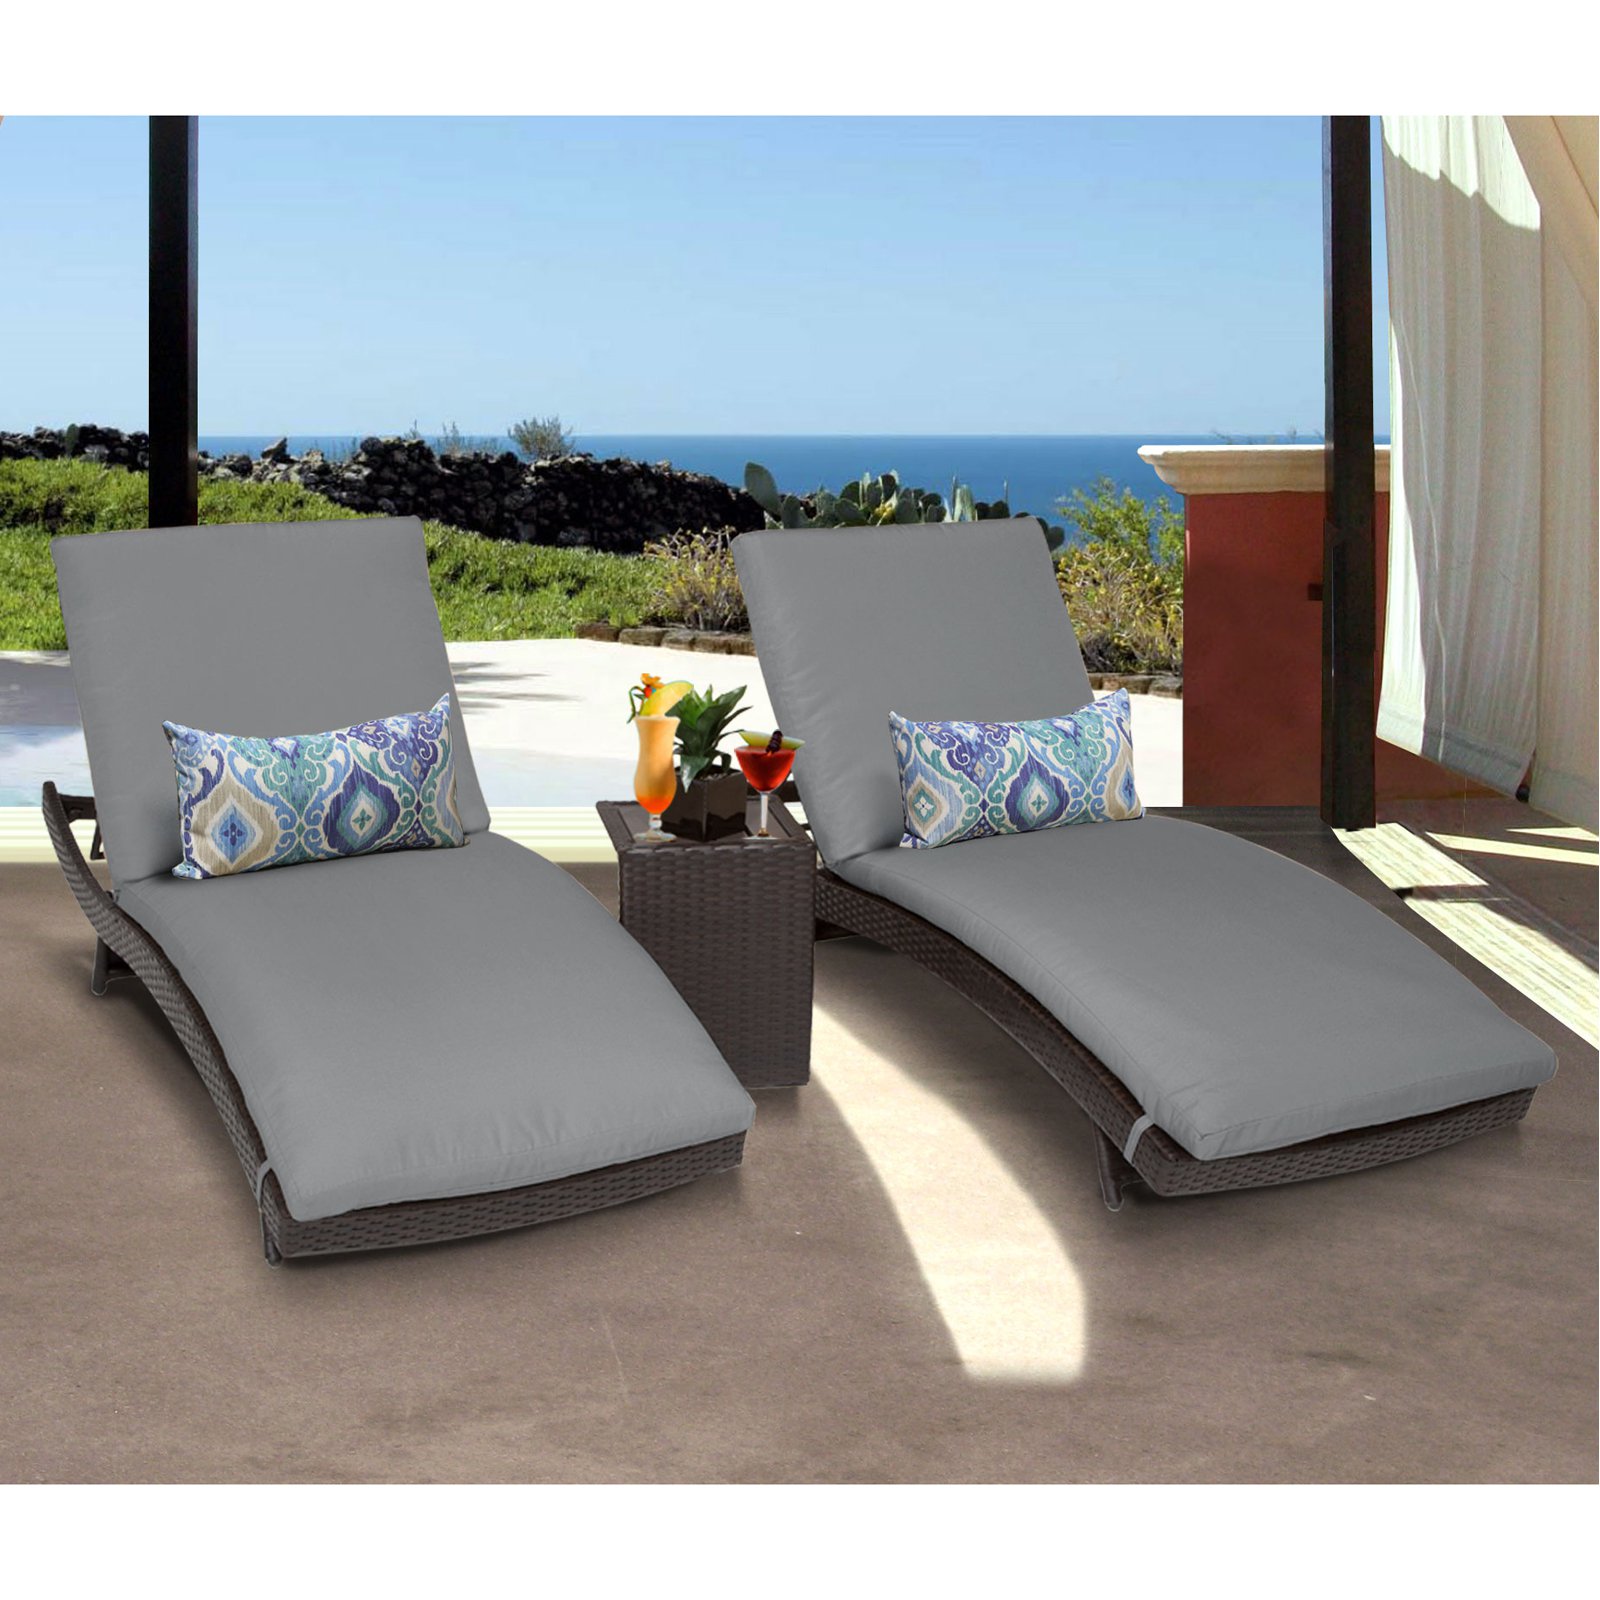 Barbados Curved Chaise Outdoor Wicker Patio Furniture in Tangerine (Set of 2) - image 4 of 4